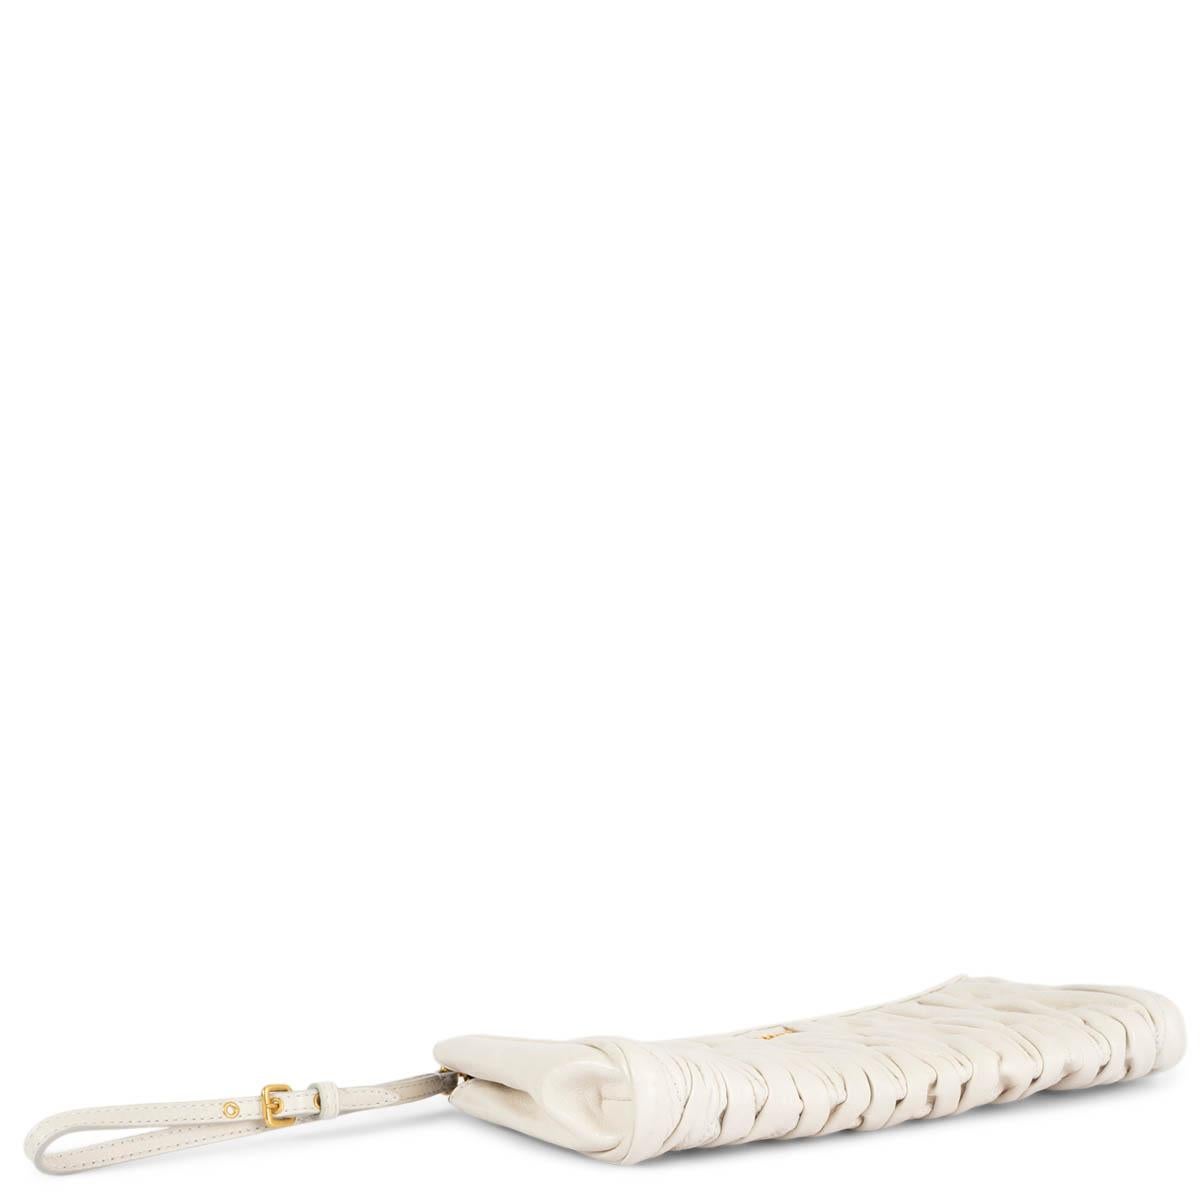 MIU MIU ivory leather MATELASSE QUILTED Wristlet Clutch Bag In Excellent Condition For Sale In Zürich, CH